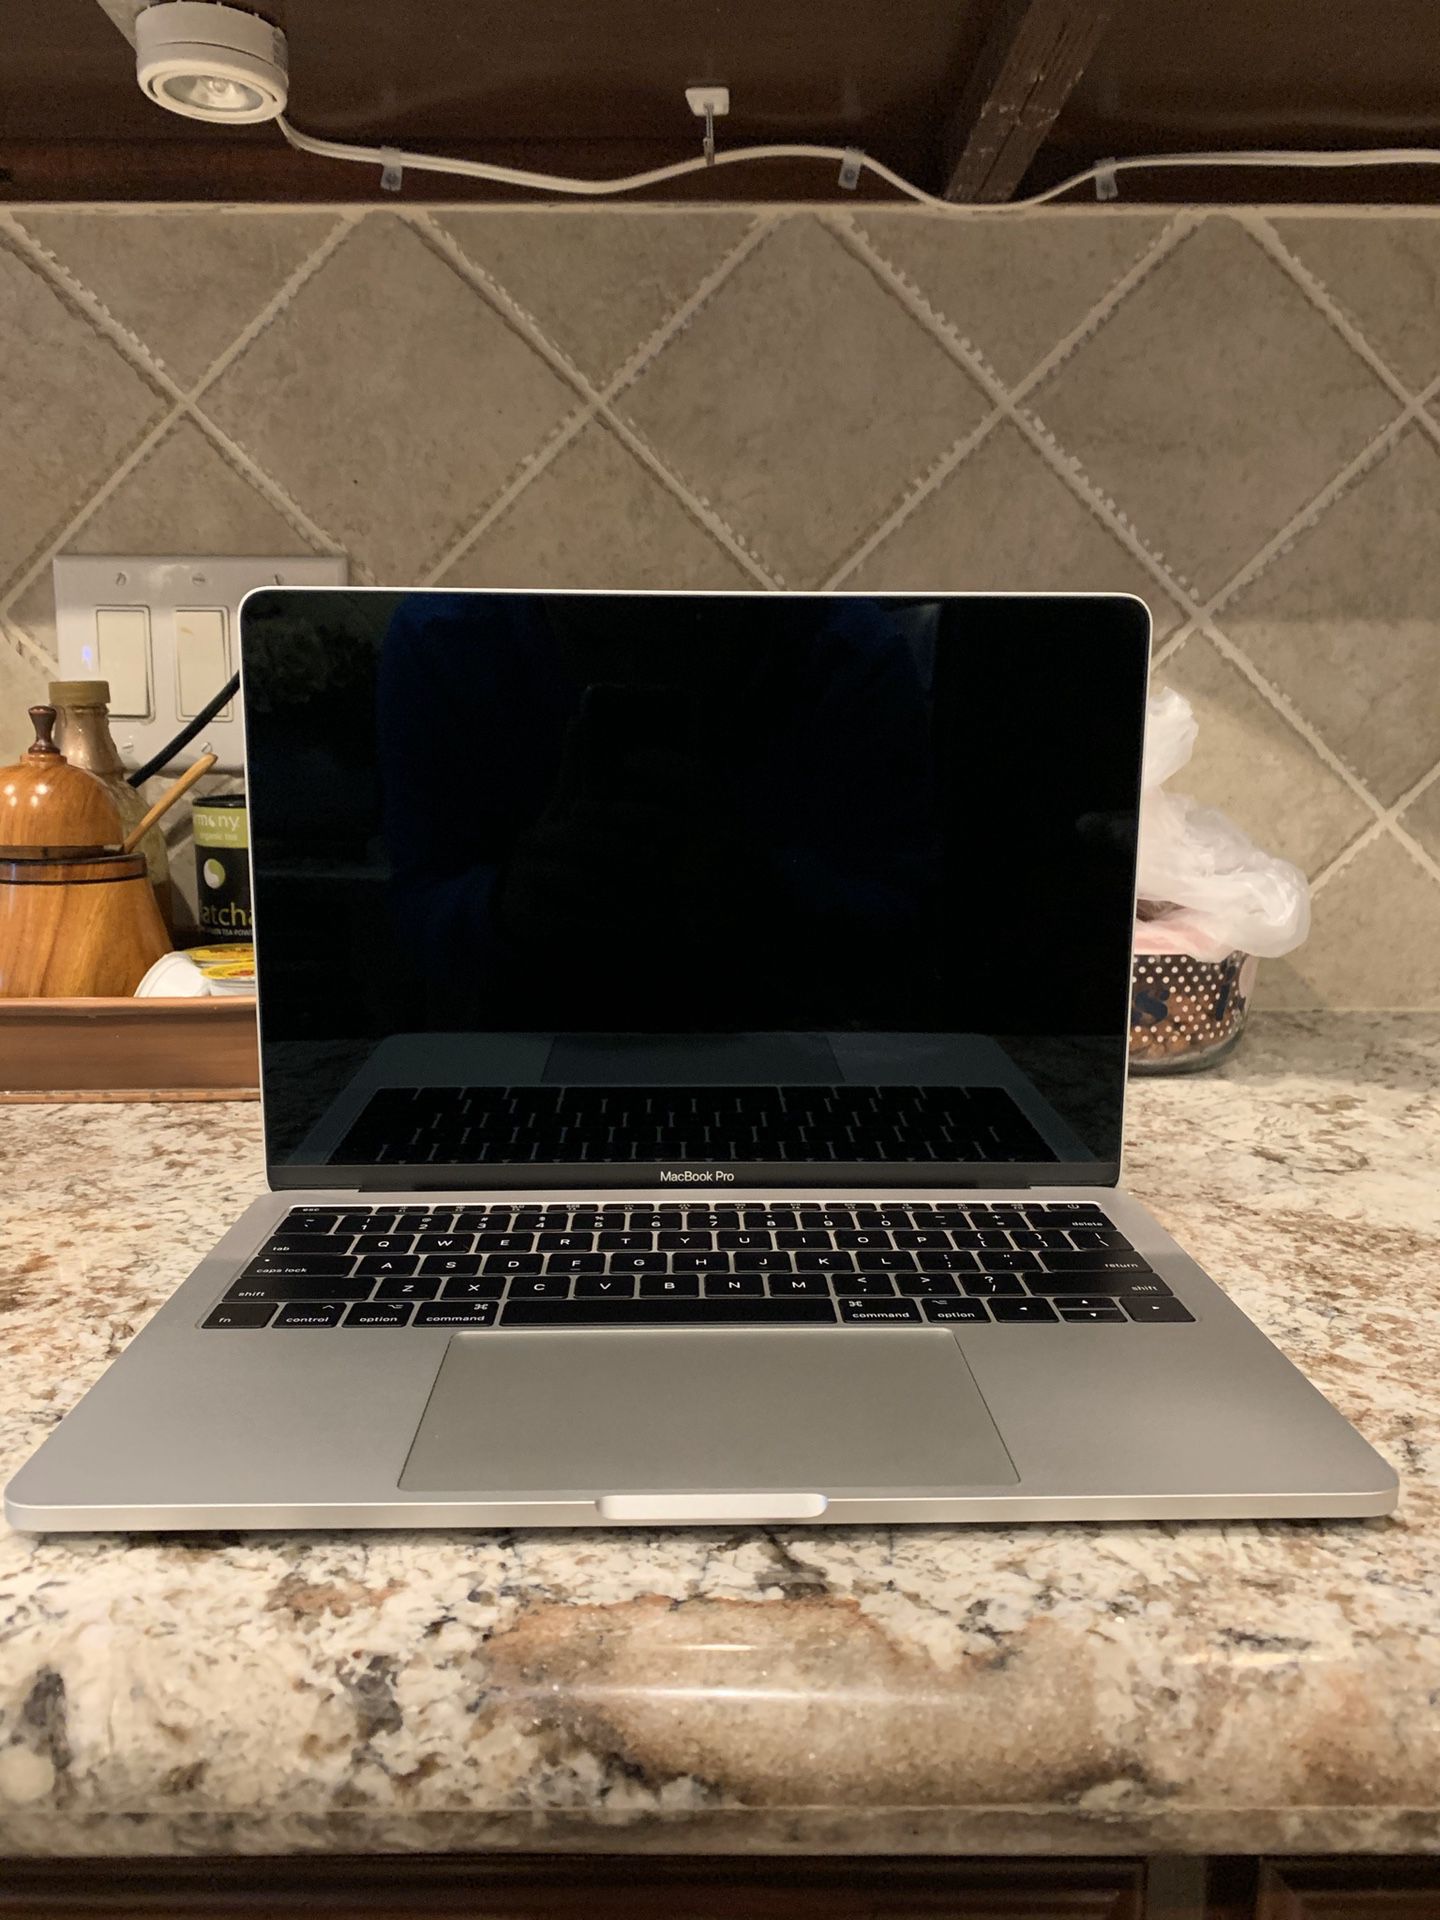 Macbook Pro 128gb (13-inch, 2017, Two Thunderbolt 3 ports) 2.3 GHz Intel Core i5